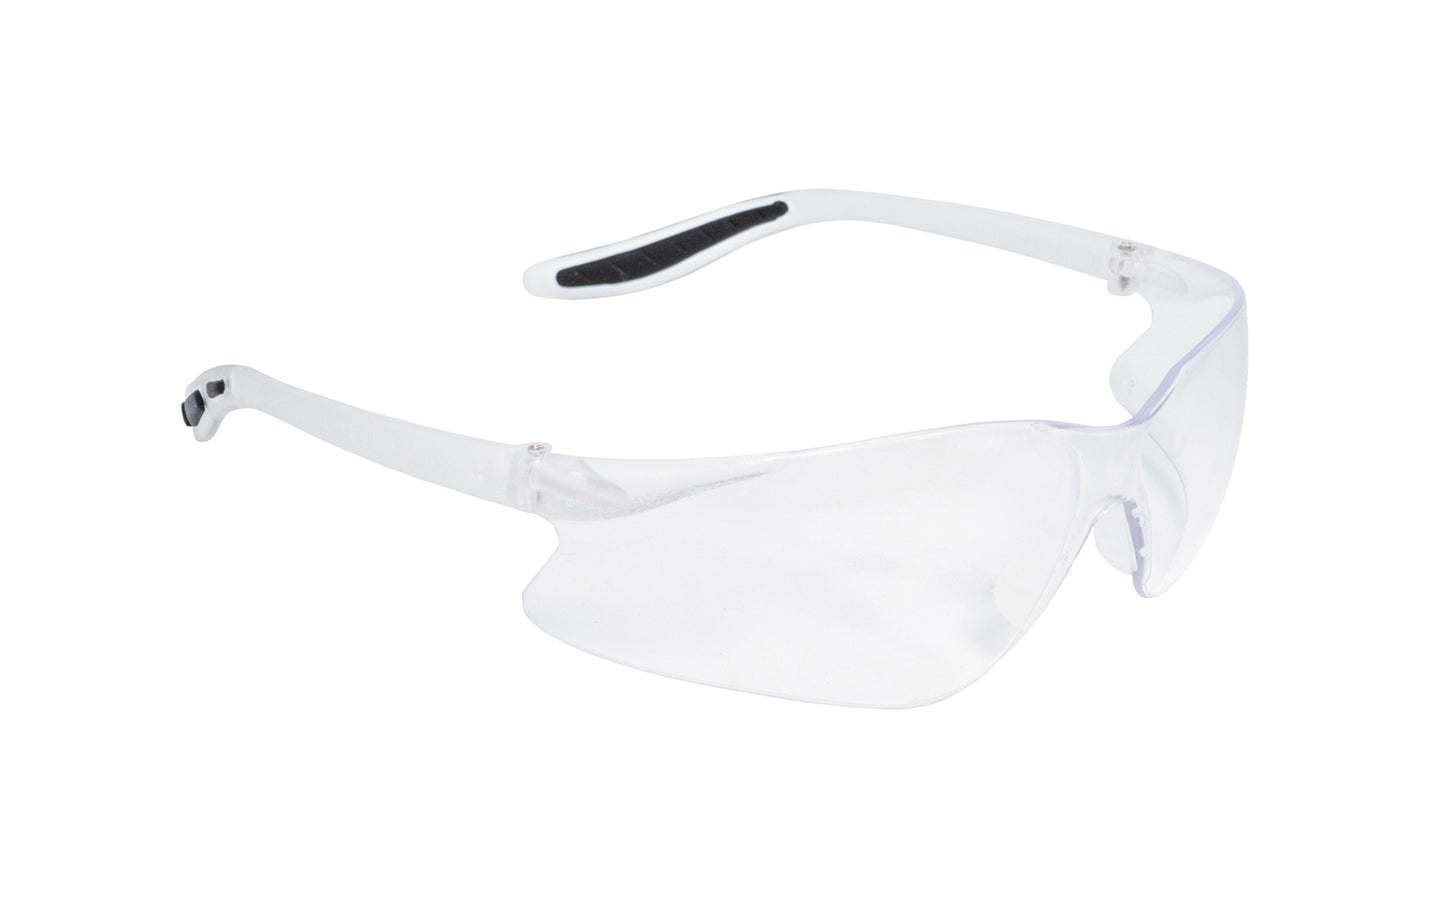 Fastcap "Featherweight" Safety Glasses have clear lenses & great for the shop & good for outdoor sporting activities. Anti-fog & anti-static lenses. FastCap "CatEyes" Featherweight Clear lenses. ANSI rated Z87.1. No magnification. UV Protection - UVB 95% UVA 60%. ANSI / OSHA approved. Shatterproof & scratch resistant 